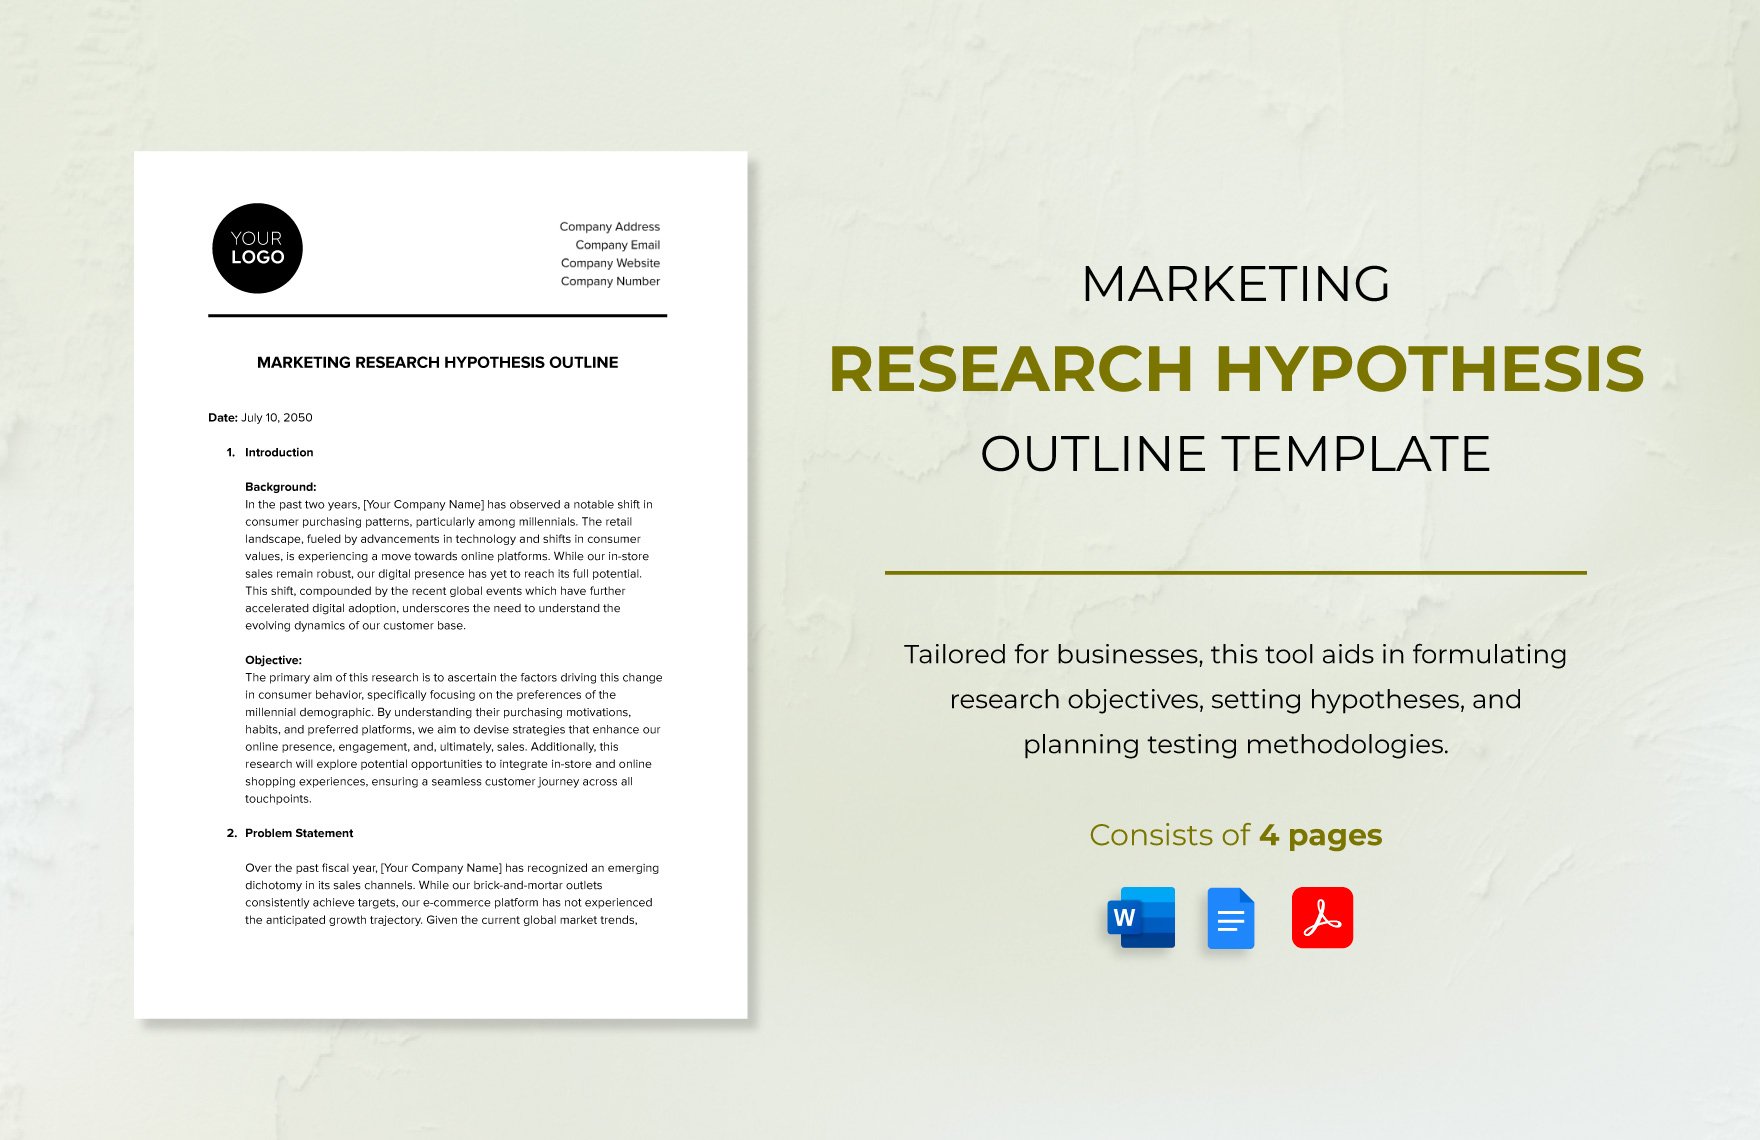 Marketing Research Hypothesis Outline Template in Word, Google Docs, PDF